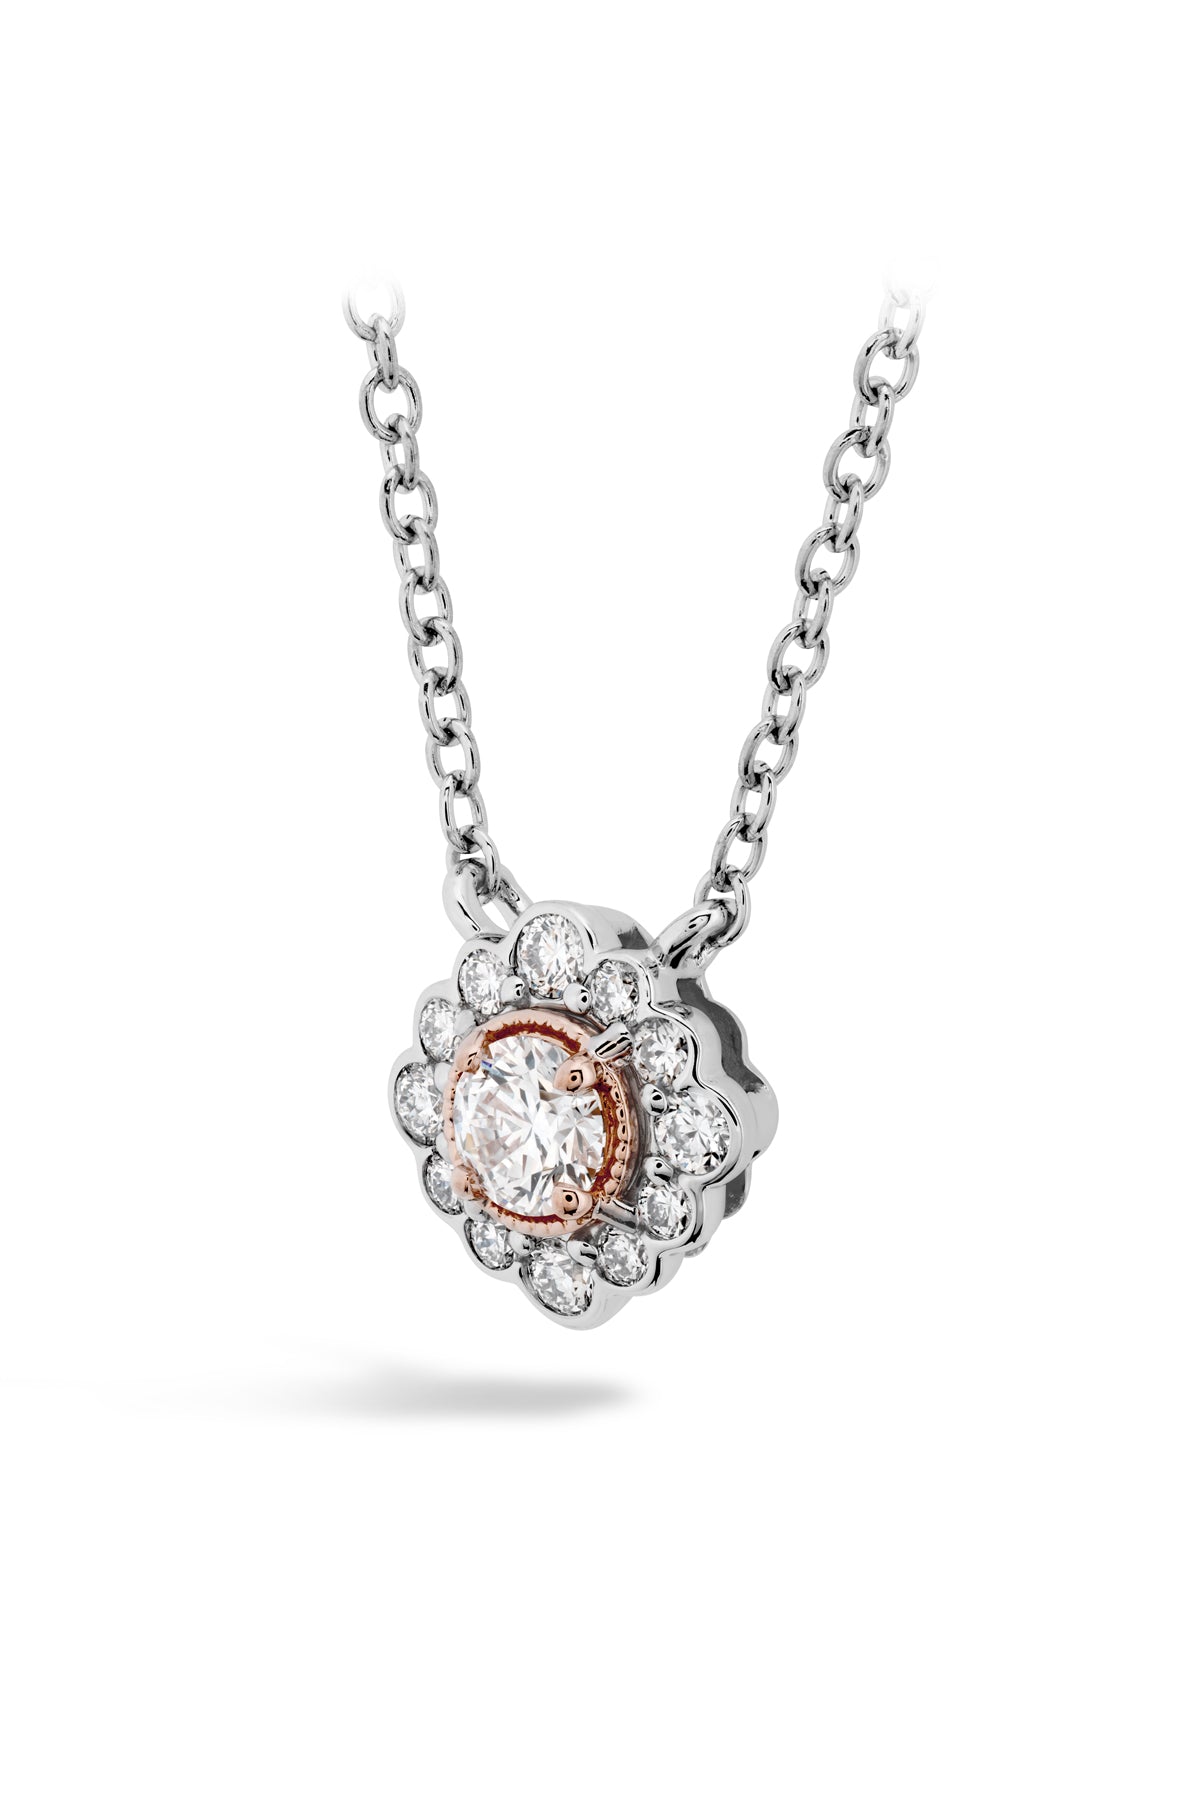 Liliana Flower Pendant From Hearts On Fire available at LeGassick Diamonds and Jewellery Gold Coast, Australia.